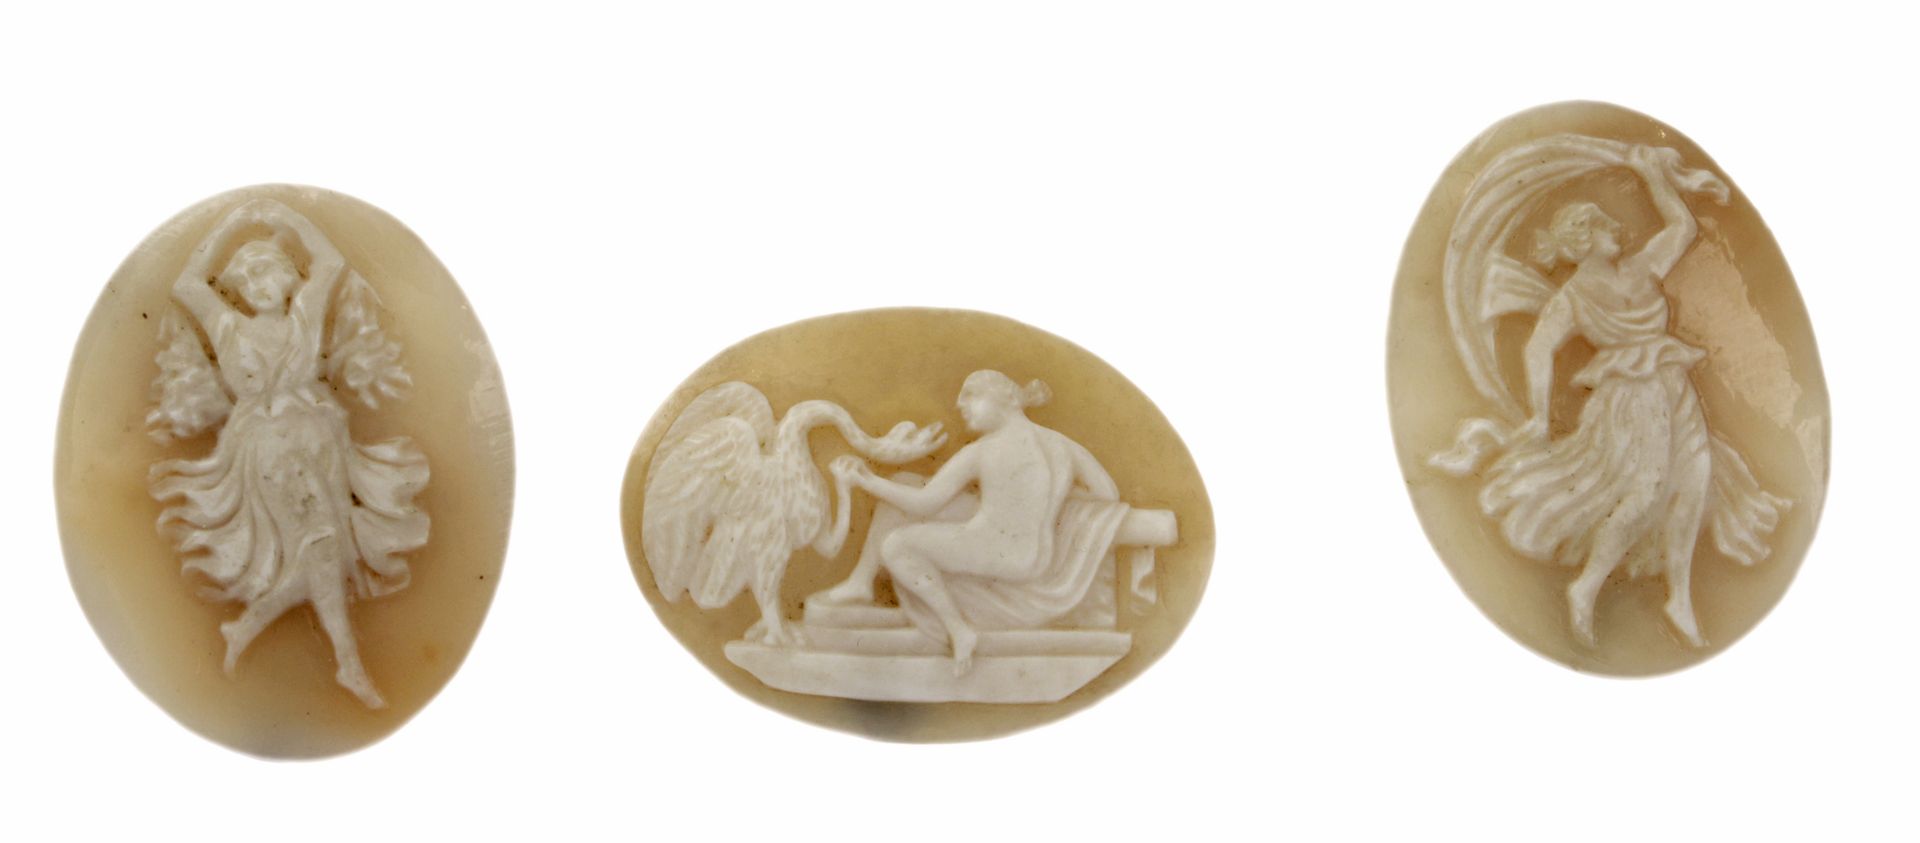 A collection of three cameos in carved shell depicting Leda, Flora and Aurora